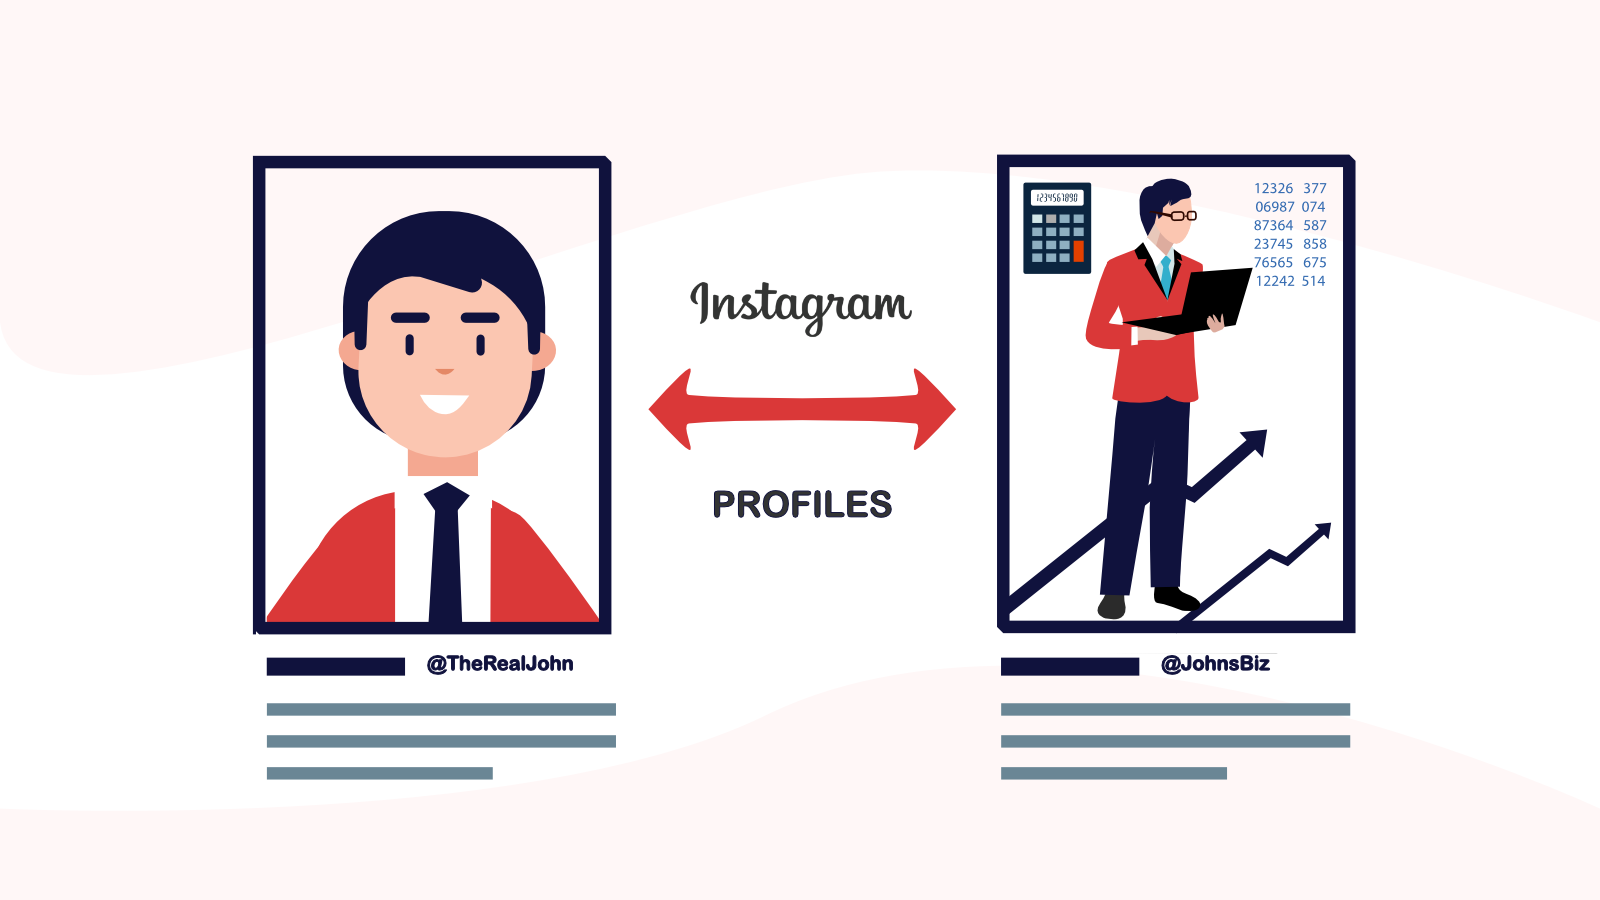 Convert your personal Instagram profile into a business instagram profile